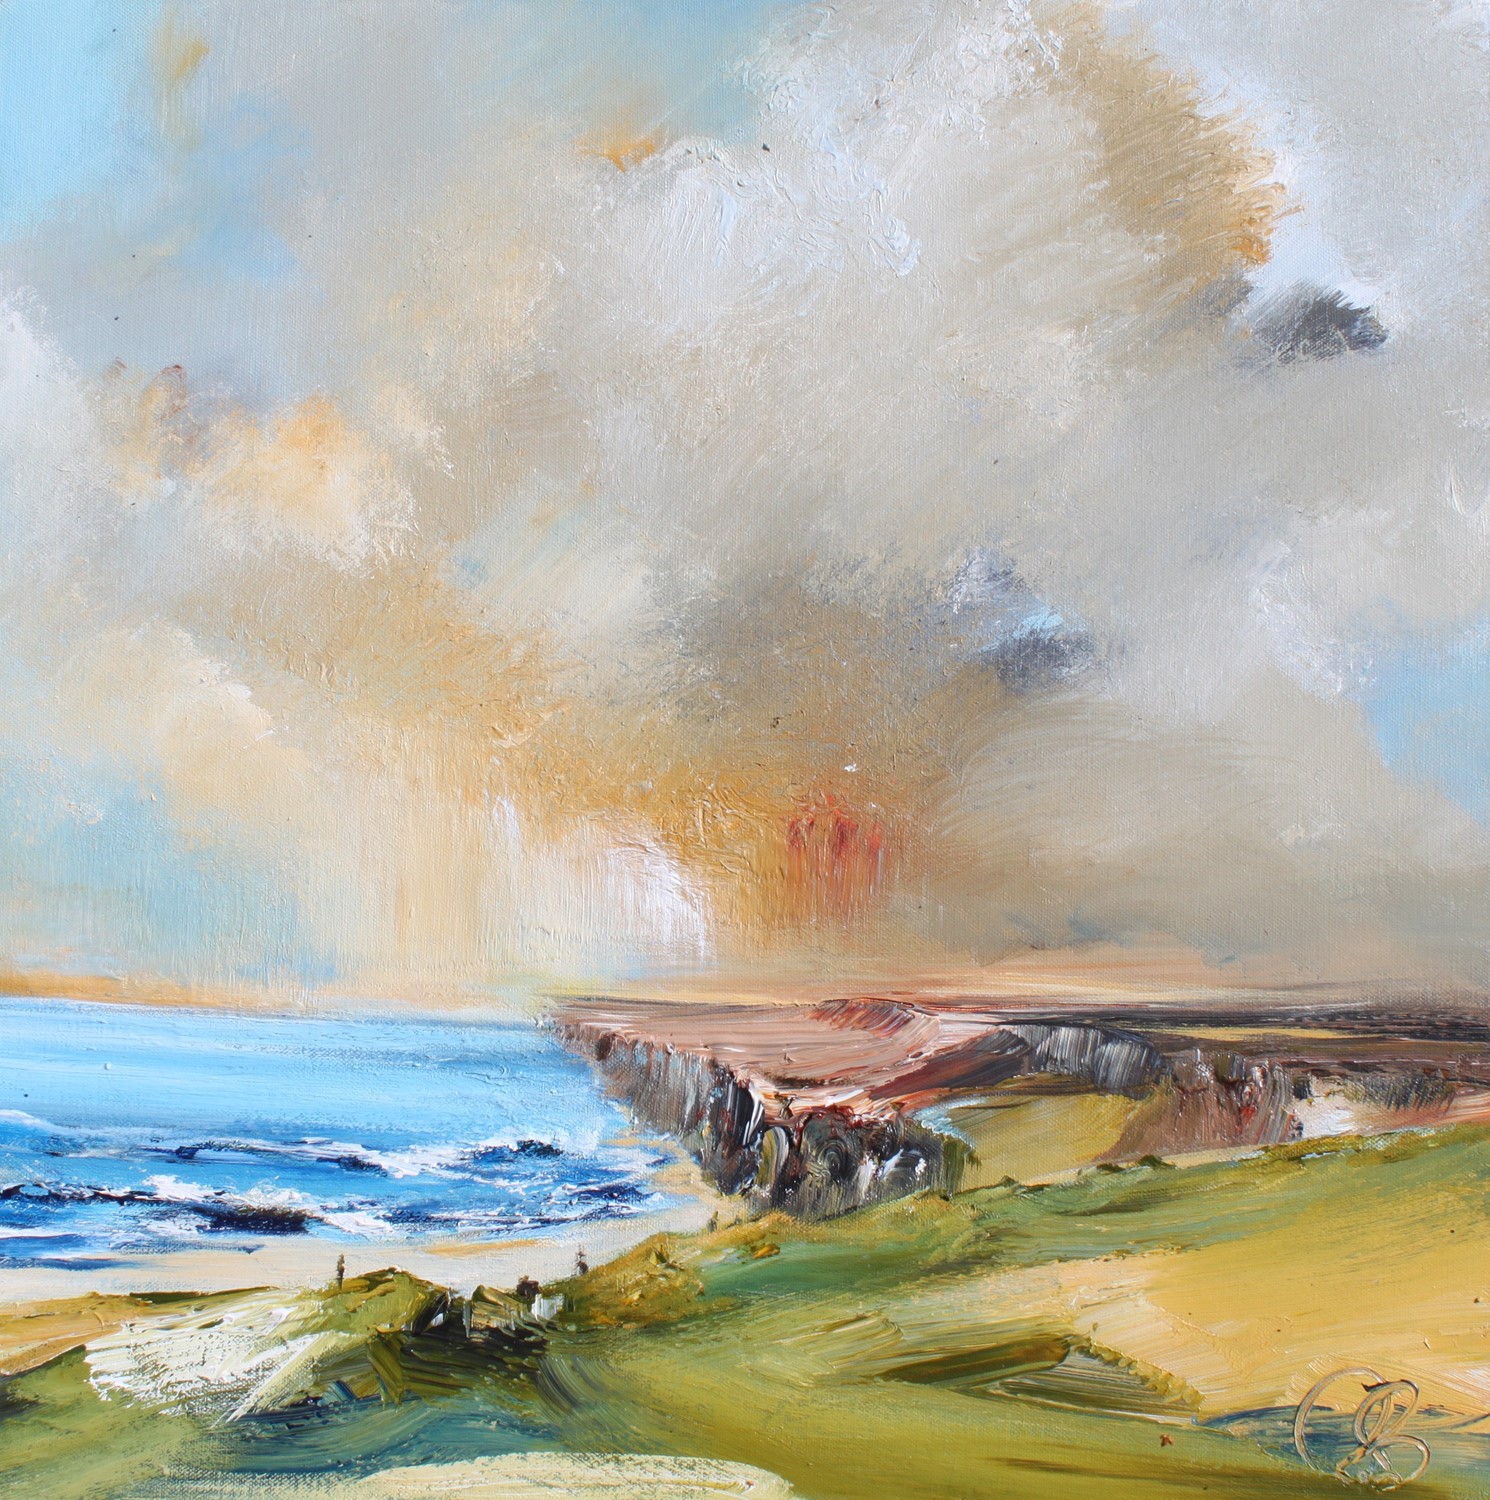 'Looking out to Sea' by artist Rosanne Barr